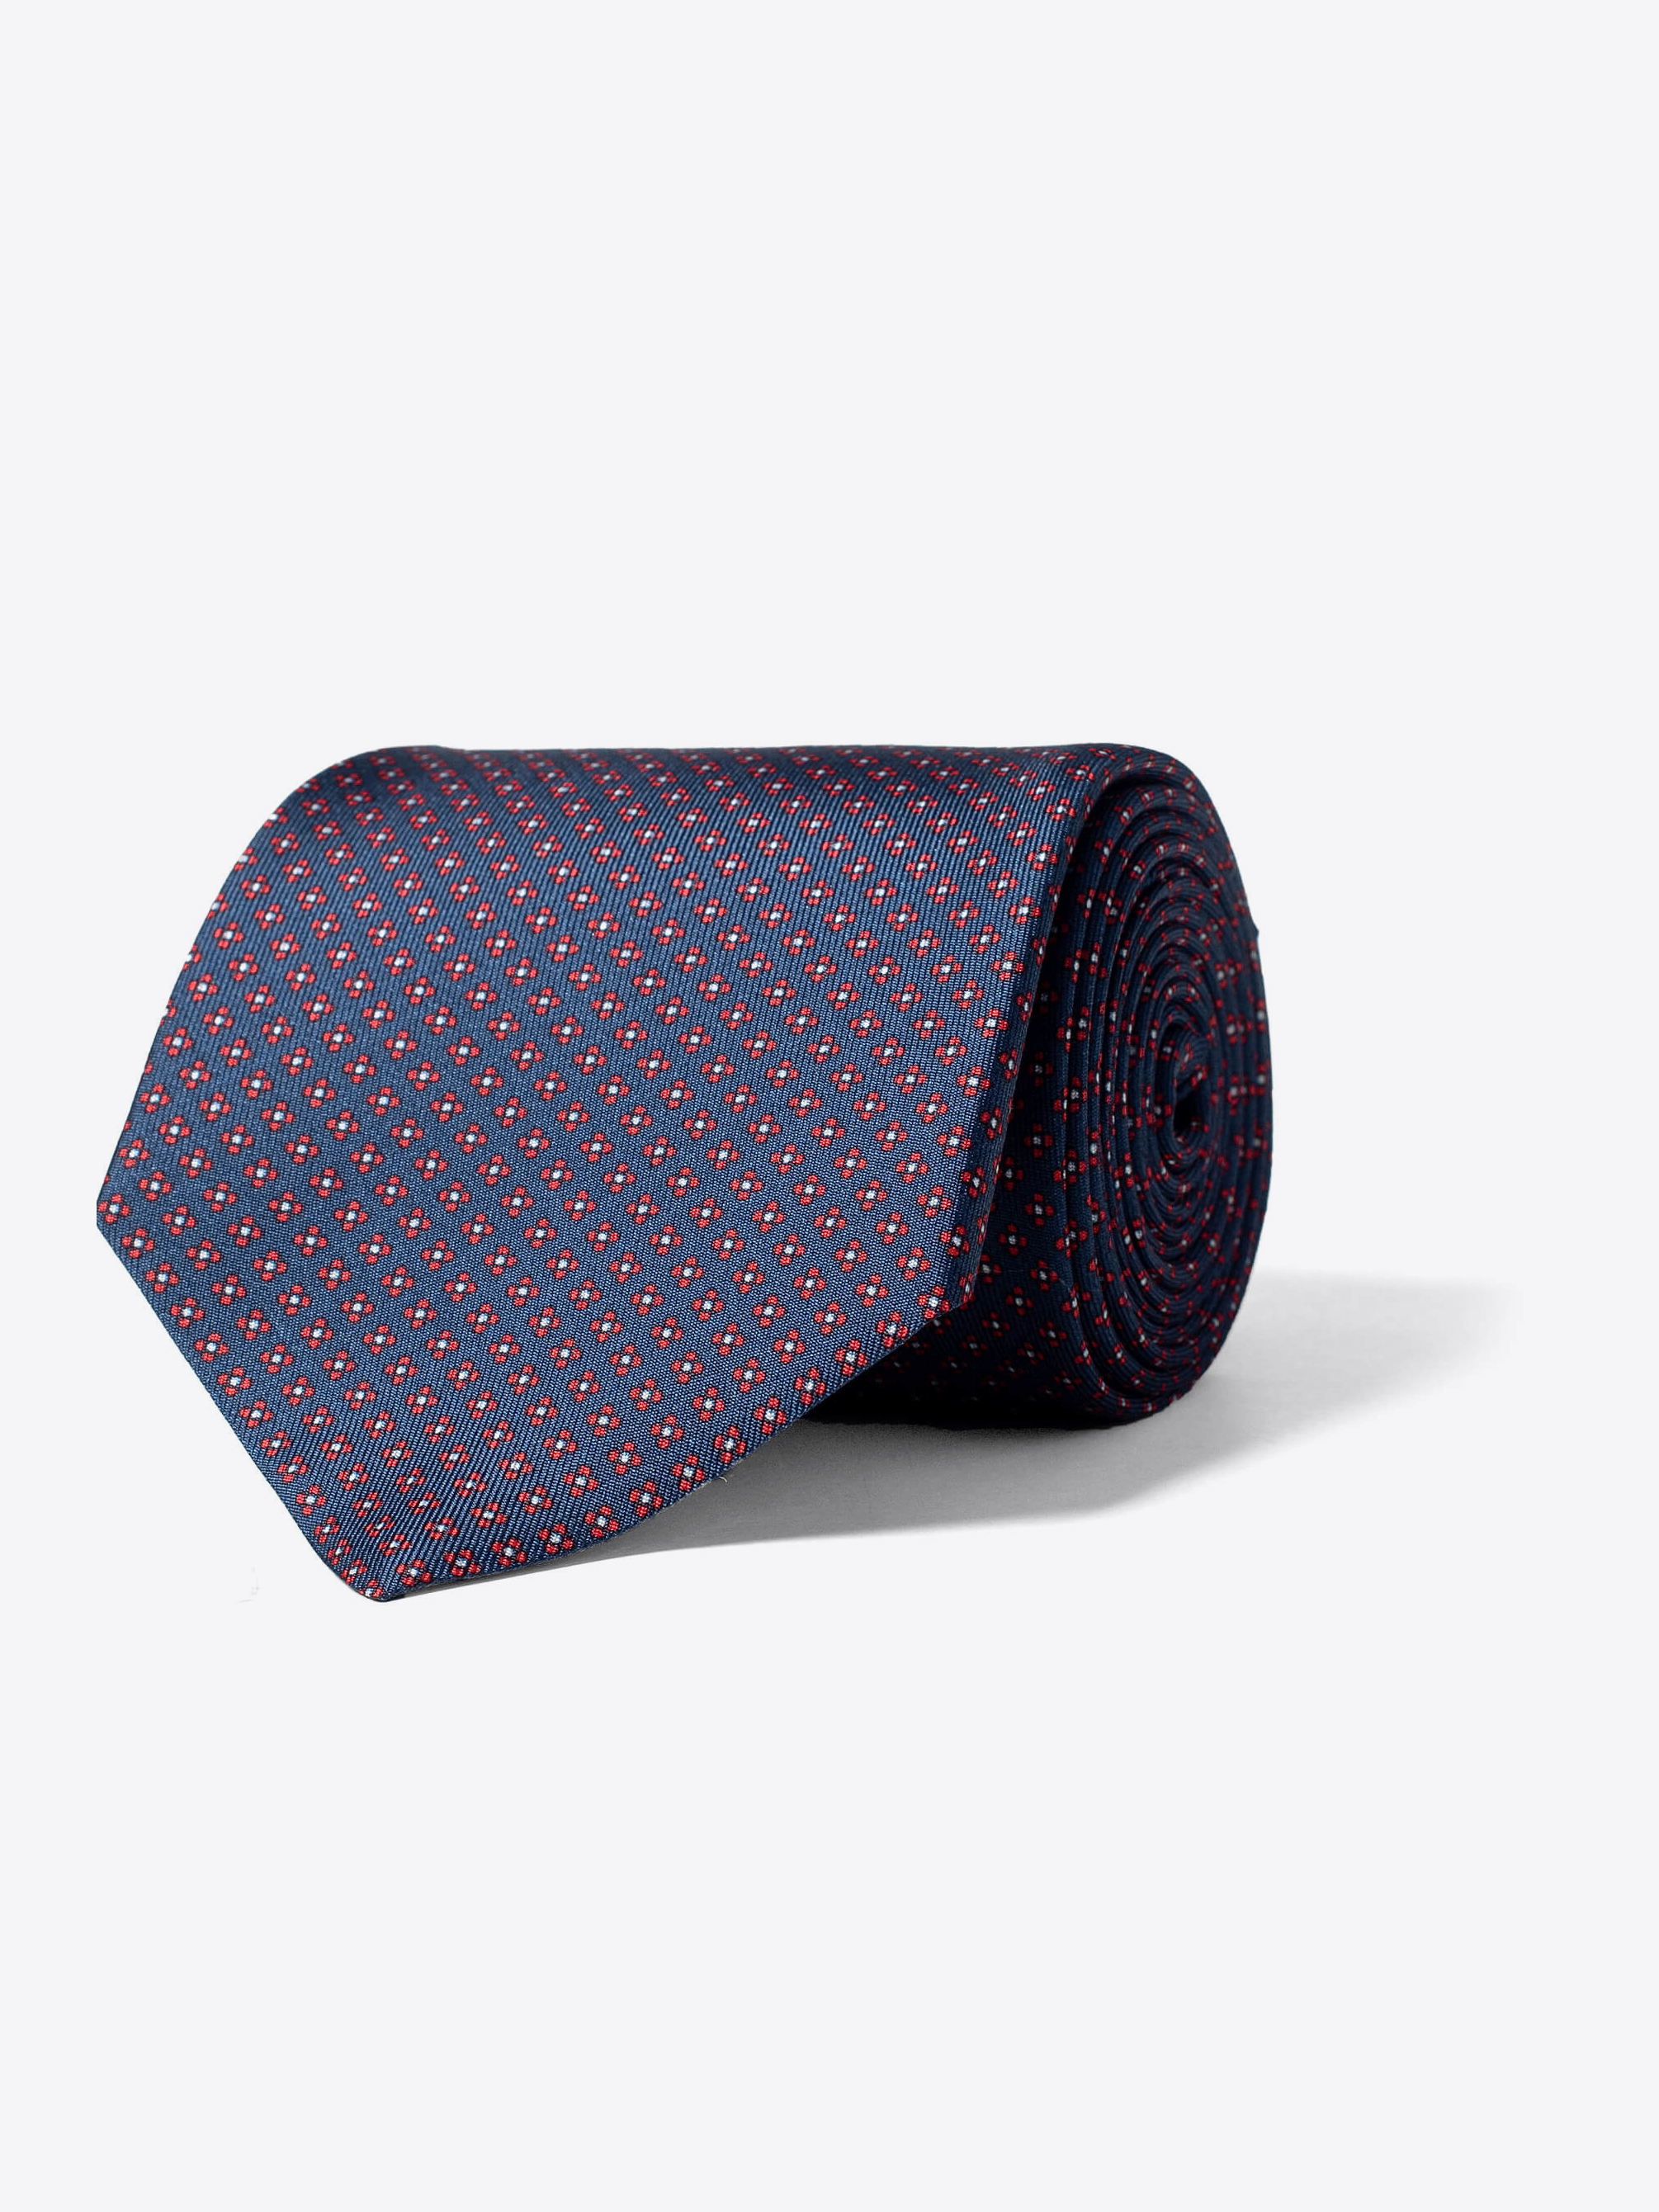 Zoom Image of Navy and Red Small Foulard Silk Tie